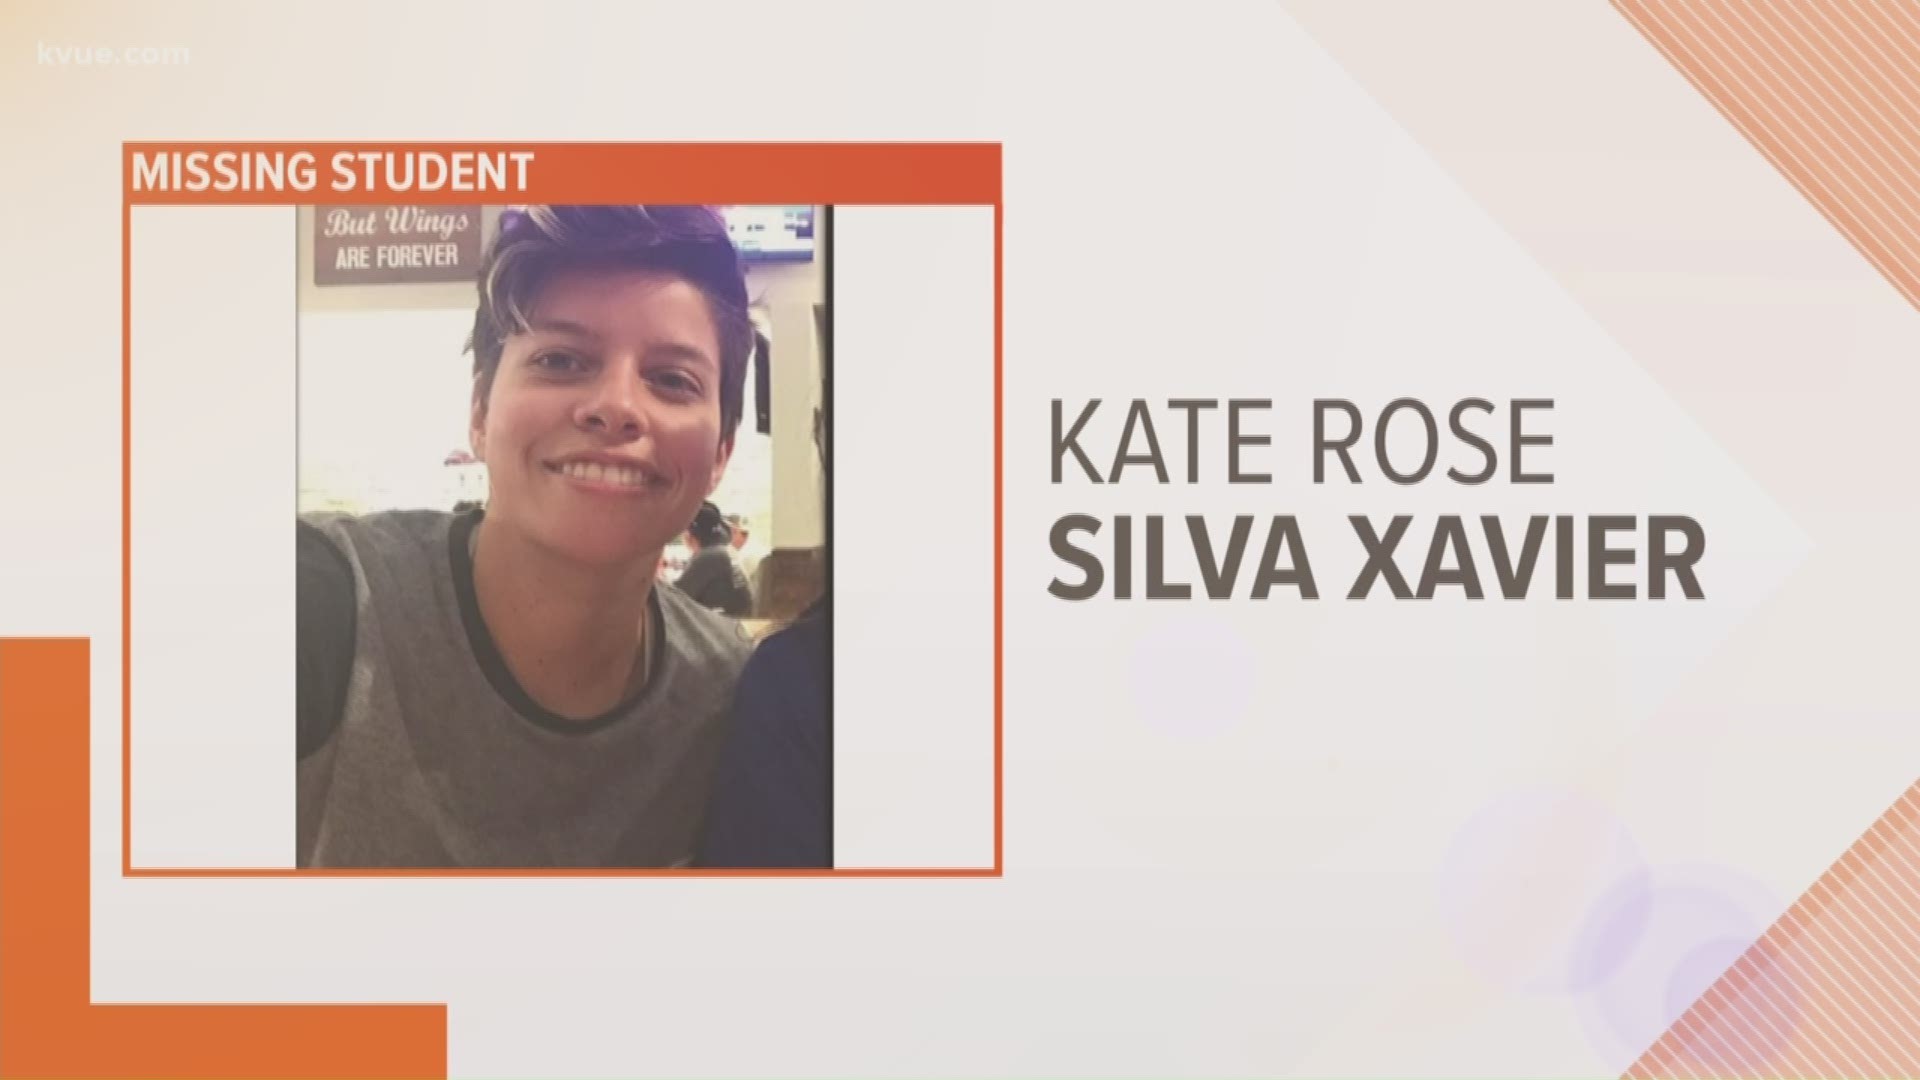 The Texas State University Police Department is looking for 21-year old Kate Rose Silva Xavier, who was last seen on Oct 25.